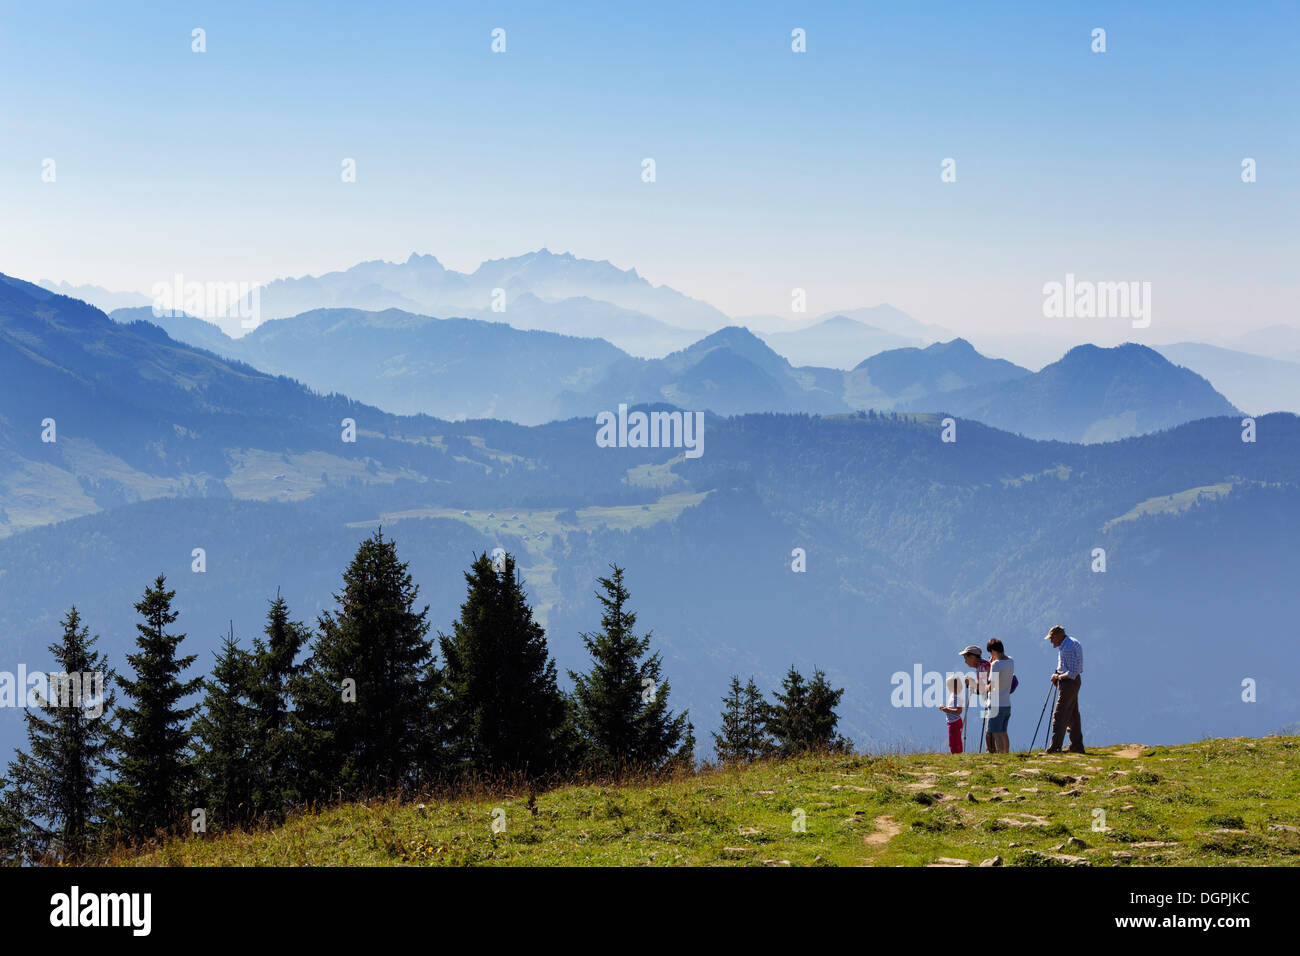 View from Mount Vordere Niedere, Andelsbuch, at back the Alpstein massif in the Appenzell Alps, Switzerland, Berg Niedere Stock Photo